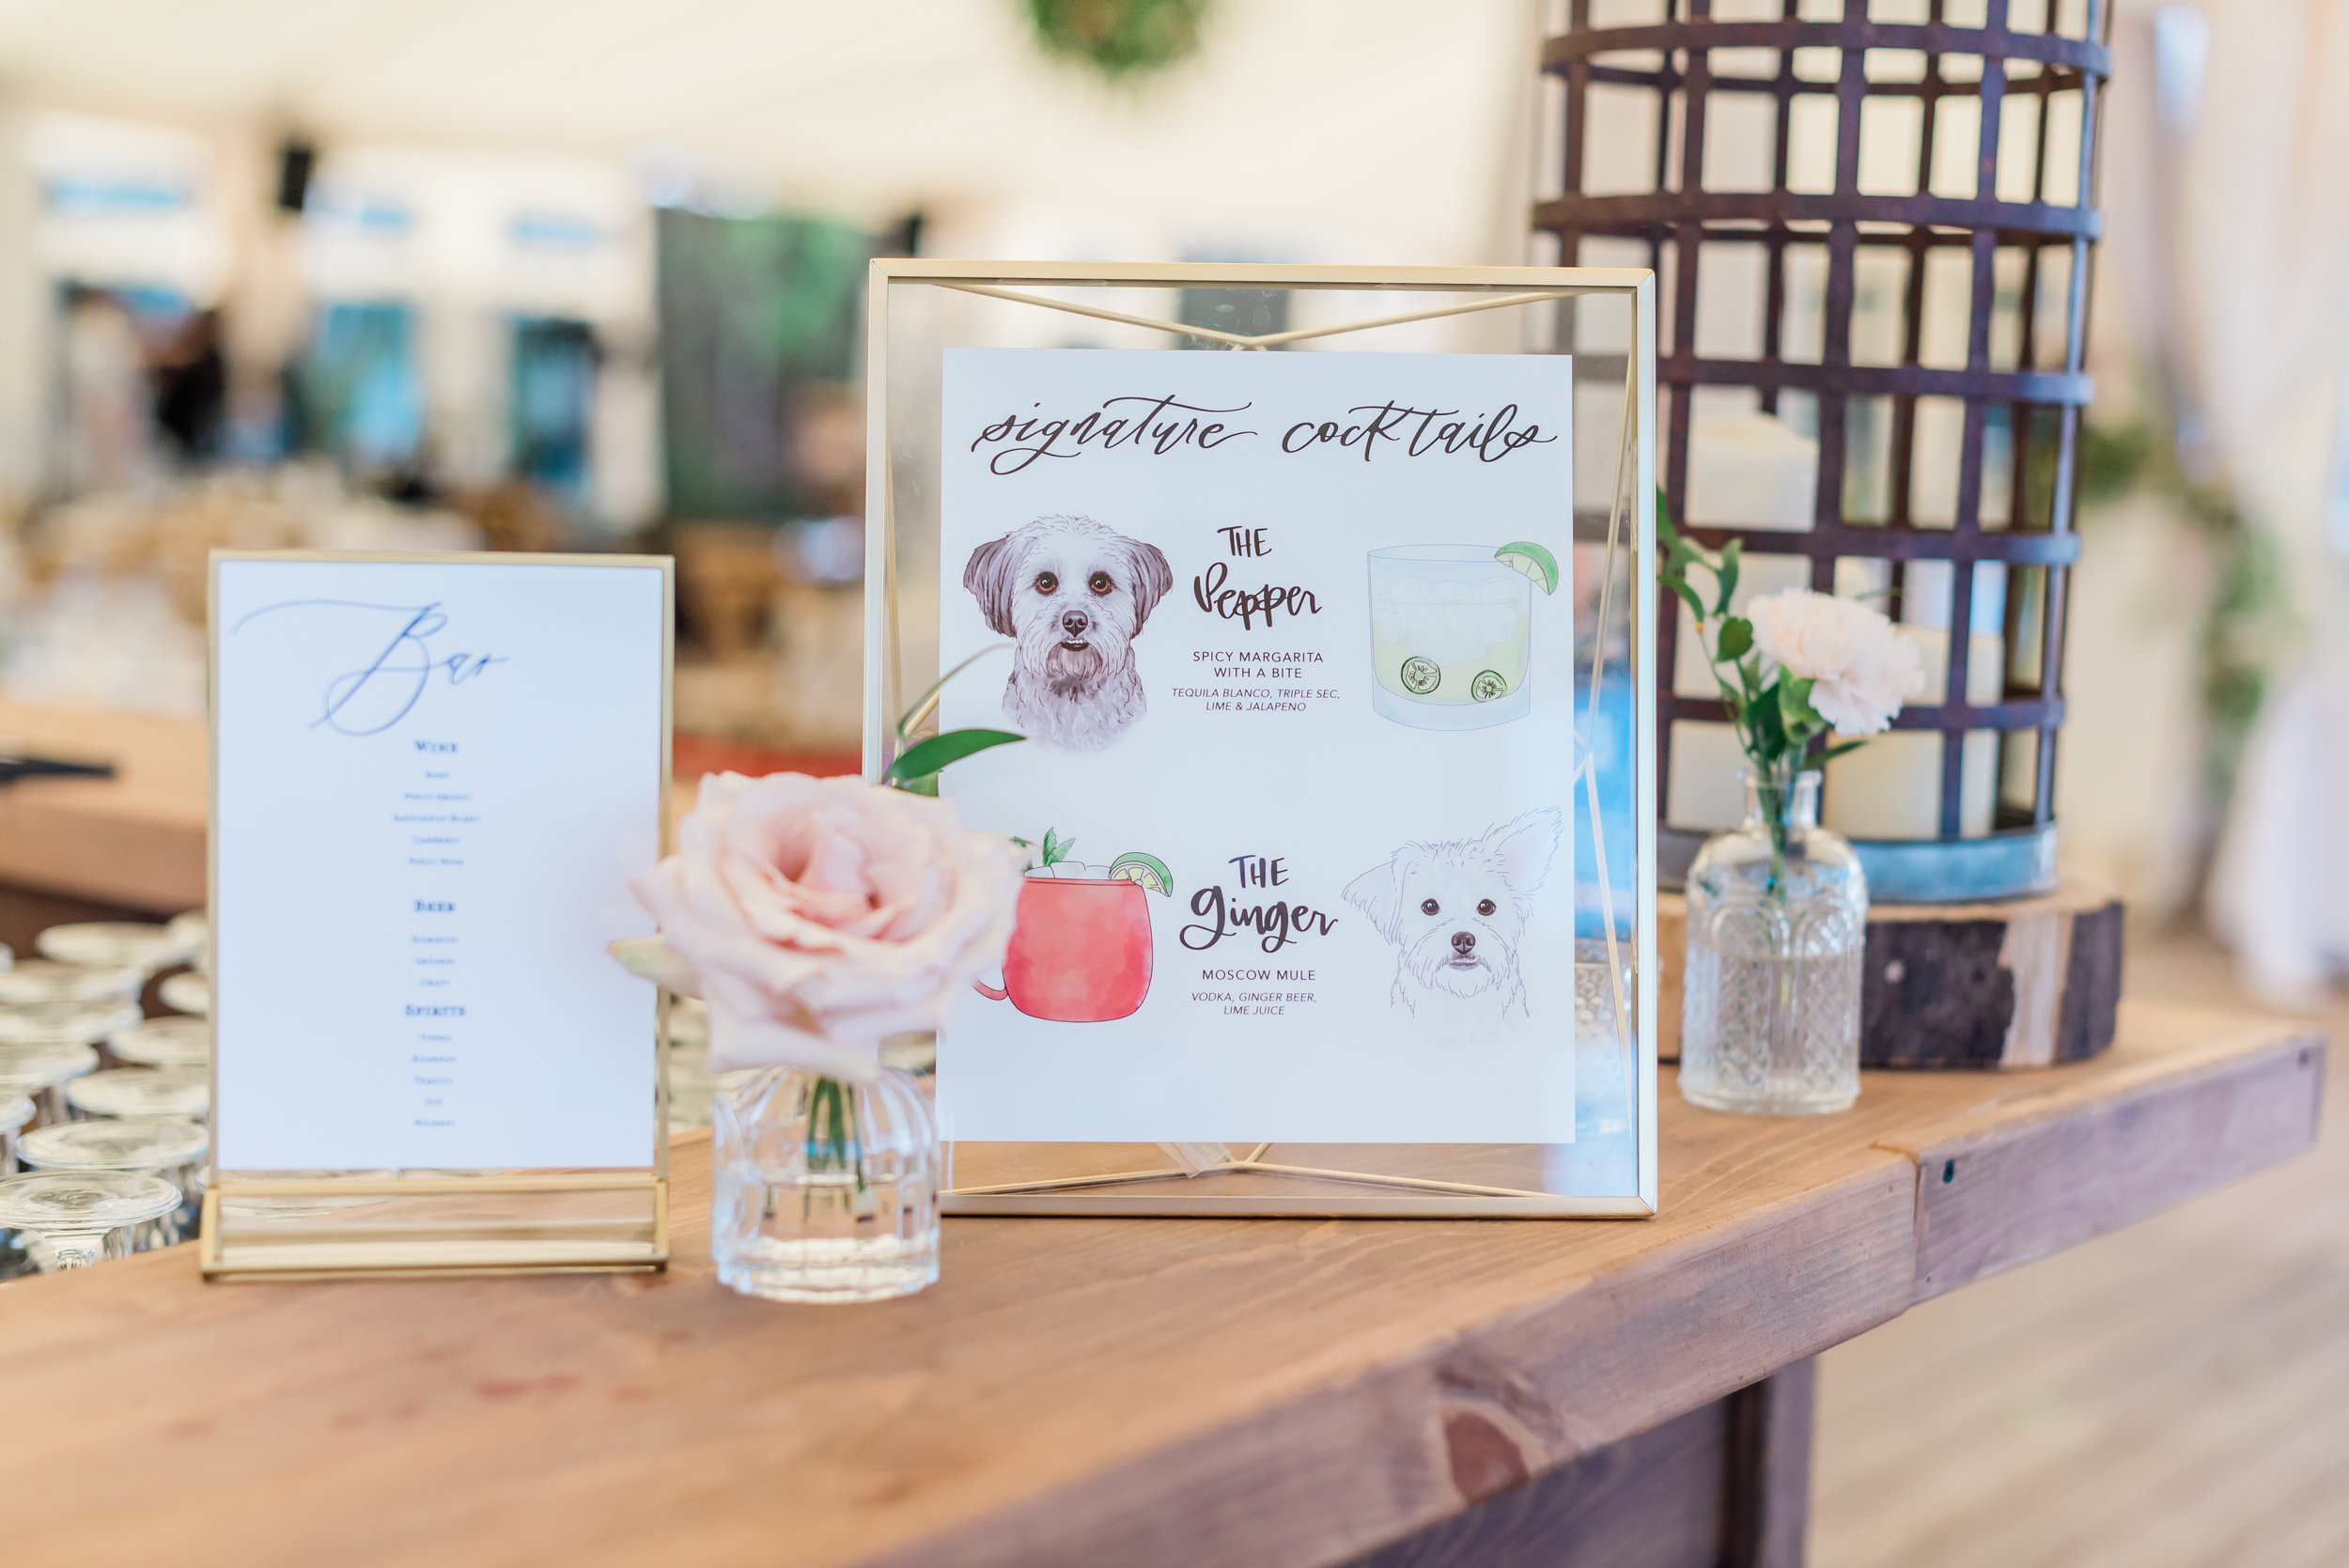  A Doggo inspired Signature cocktail — Name the drinks at the bar after your dog &amp; create custom signage for the drink menu. At Nancy &amp; Brant’s semiahmoo wedding, they hilariously named both their signature cocktail after their dogs, Ginger &